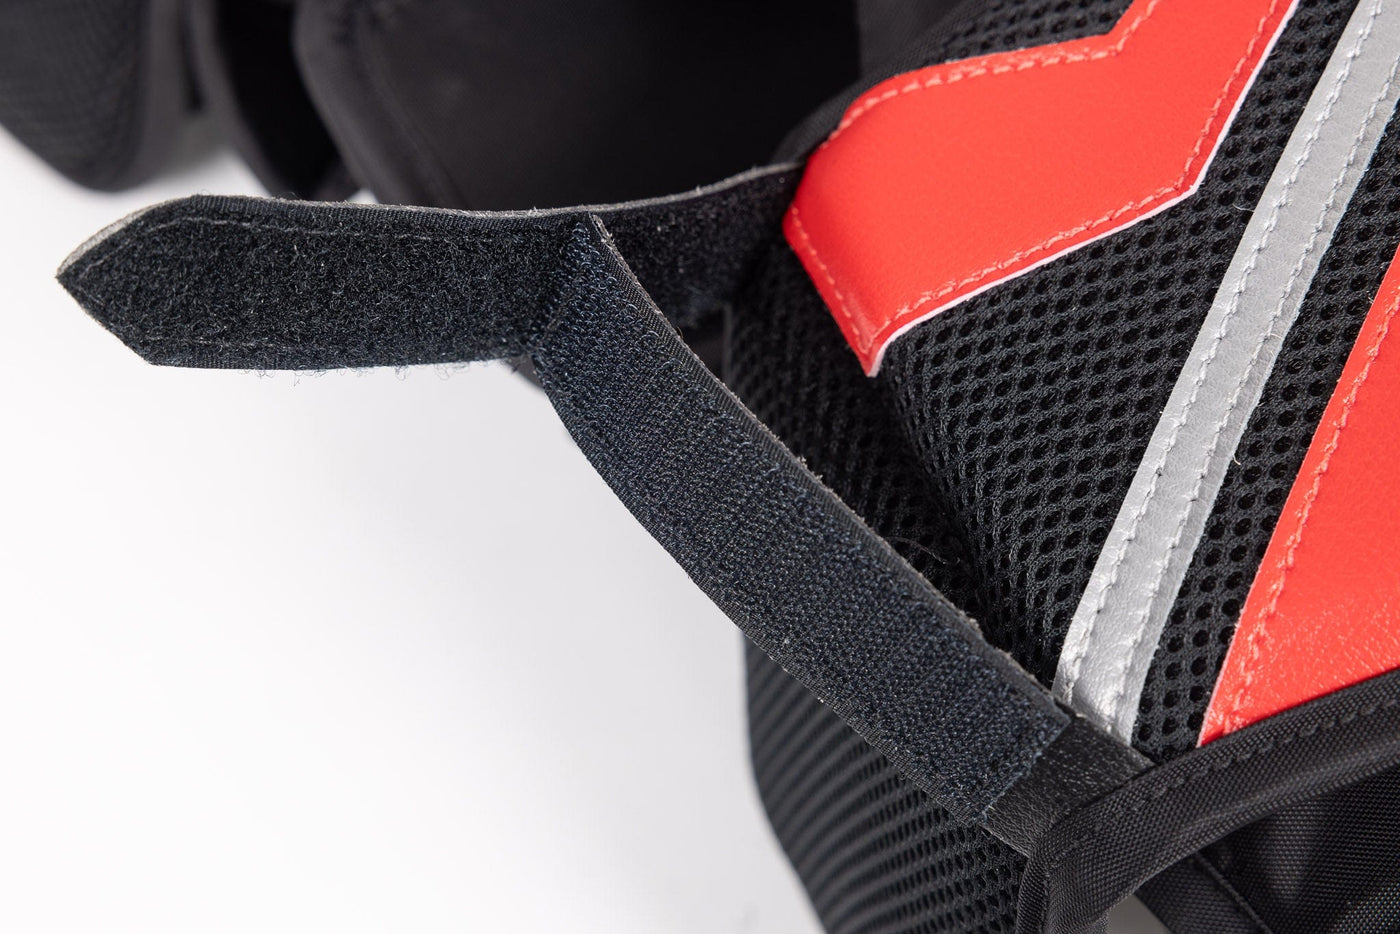 McKenney XPG2 Xtreme Junior Goalie Chest & Arm Protector - The Hockey Shop Source For Sports